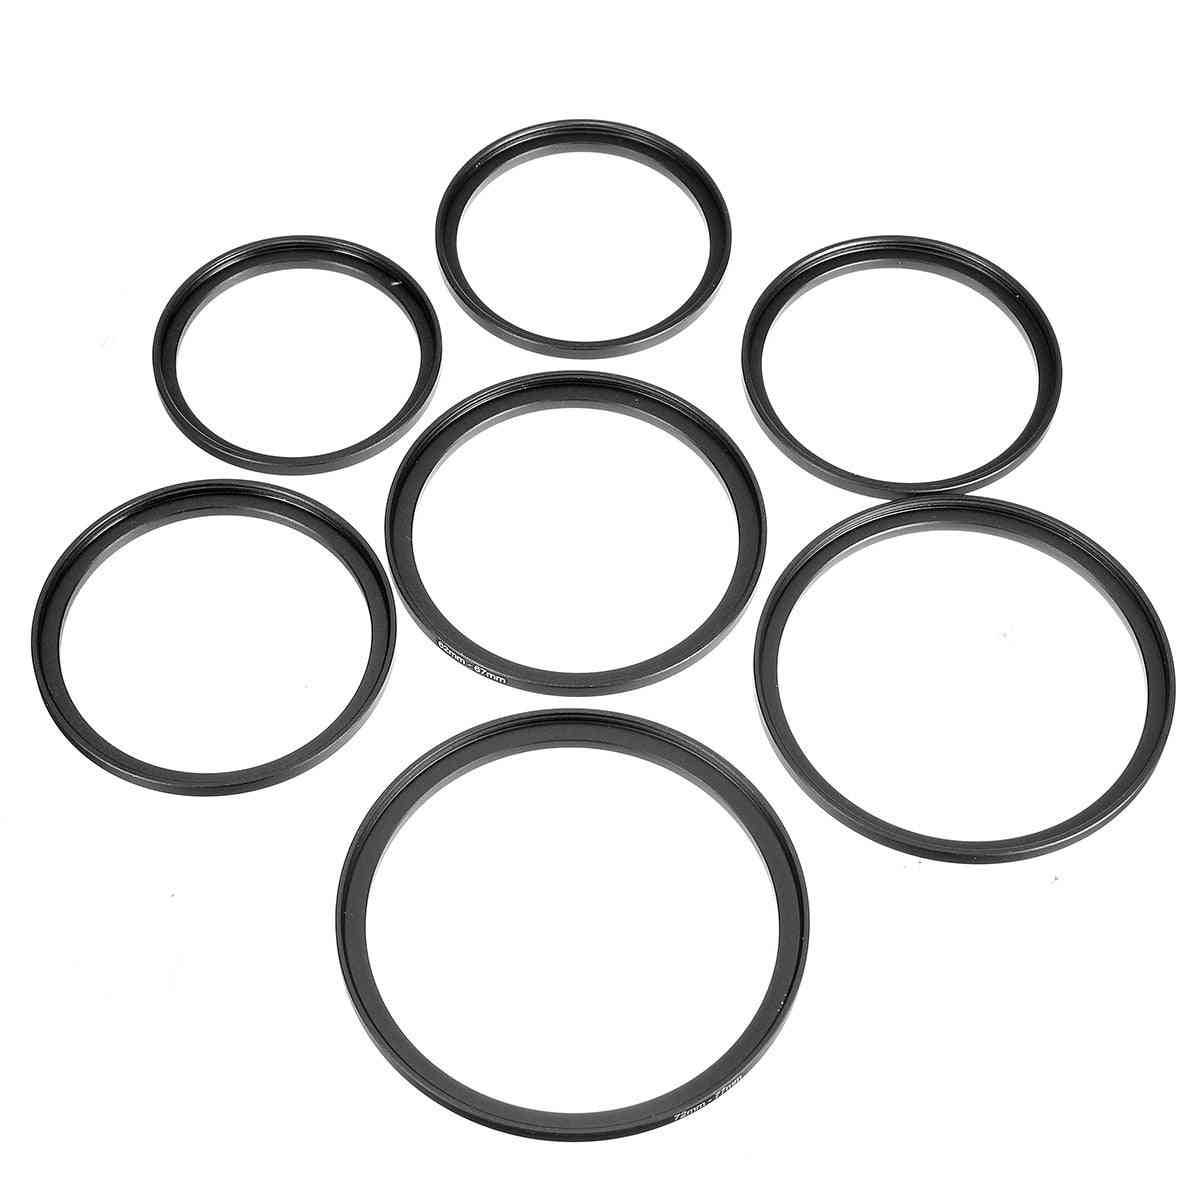 Lens Adapter Step Up Rings